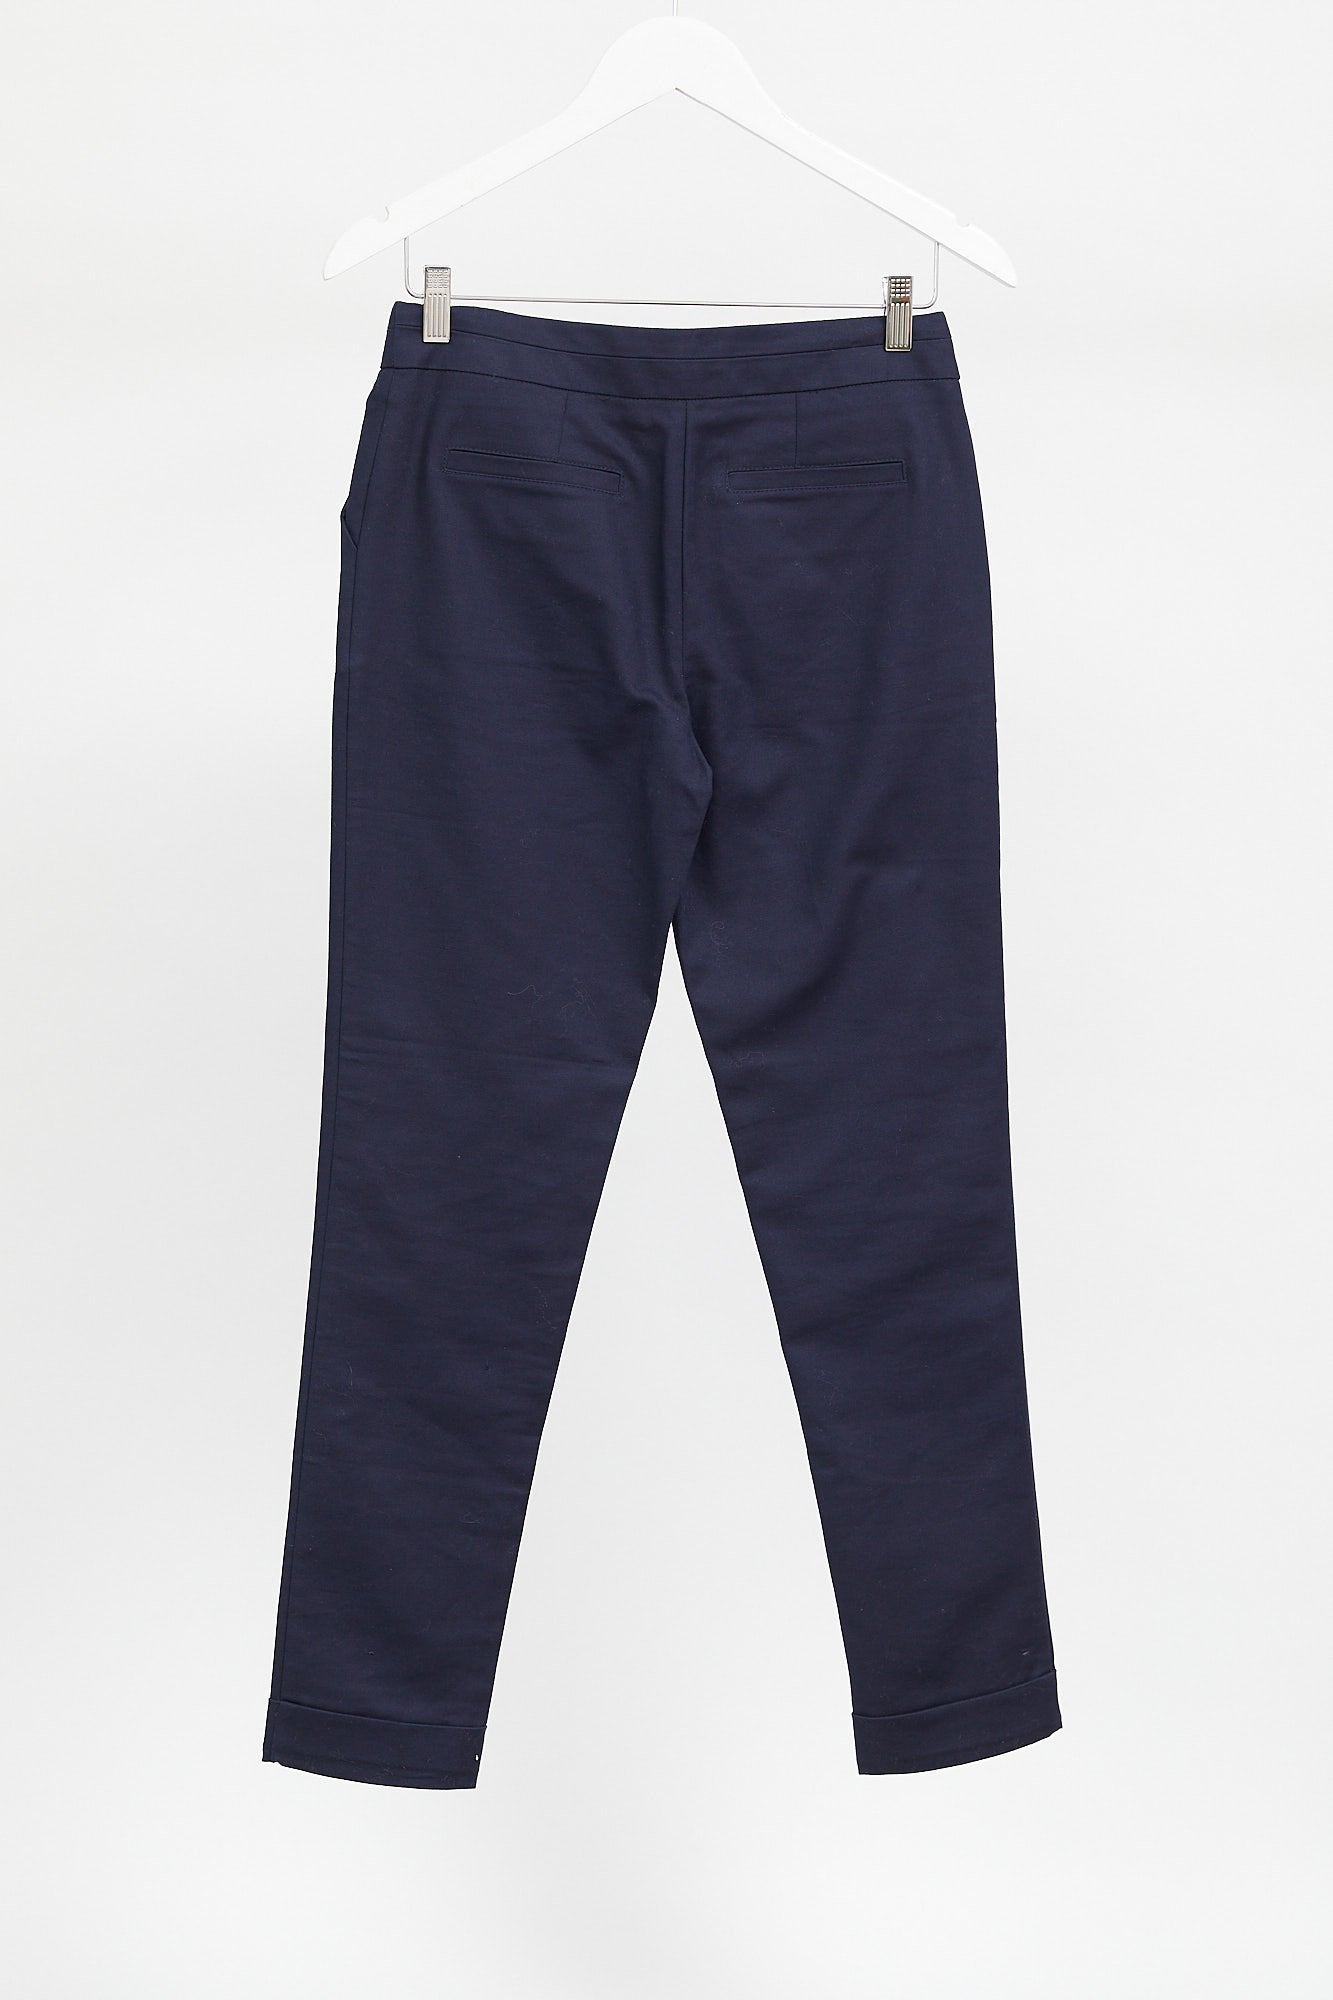 Womens Navy Trousers: Size 8-10 or Small